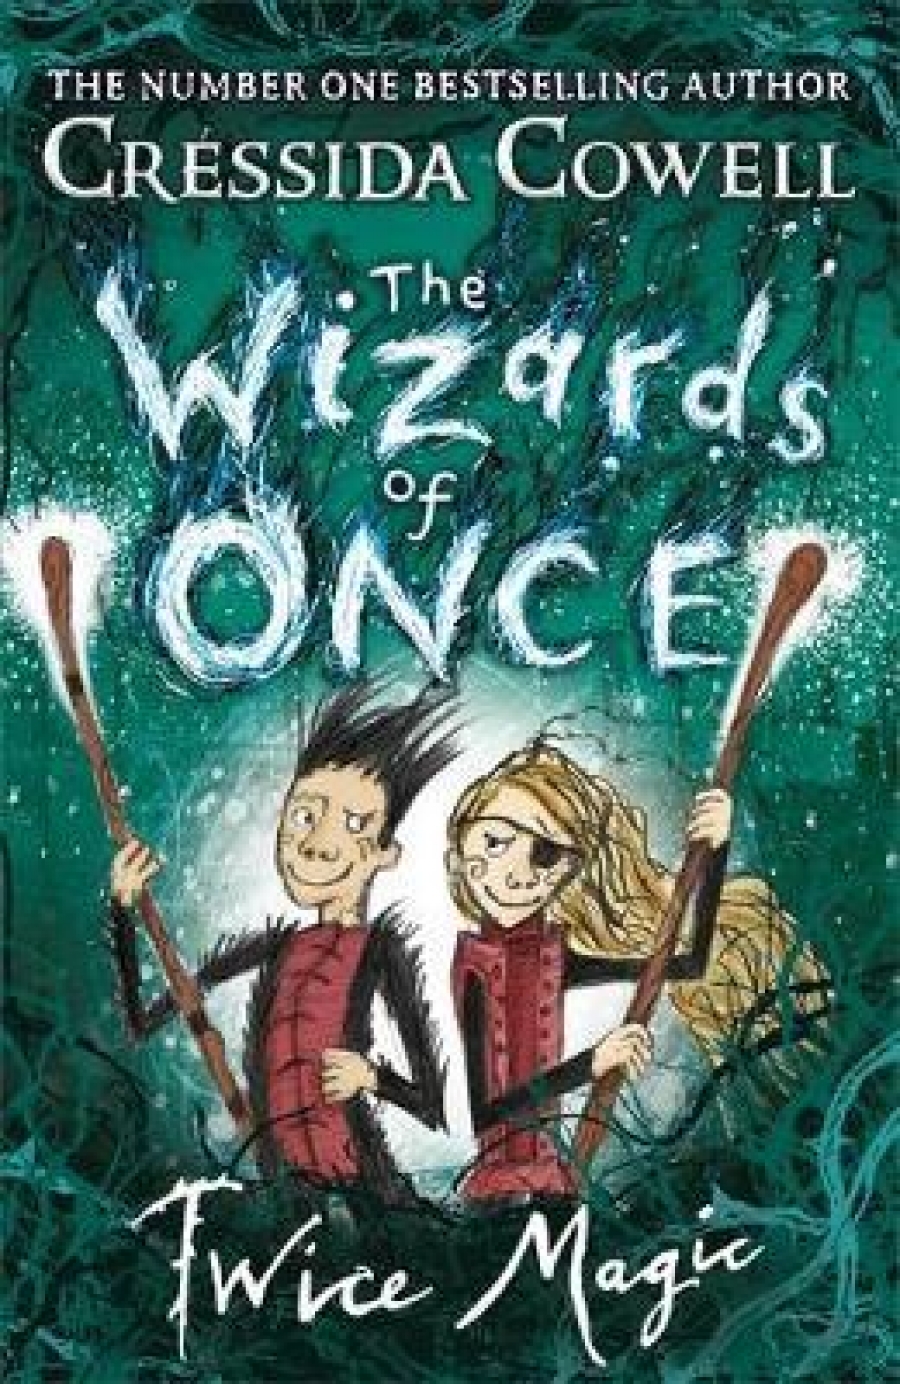 Cowell Cressida The Wizards of Once. Twice Magic. Book 2 